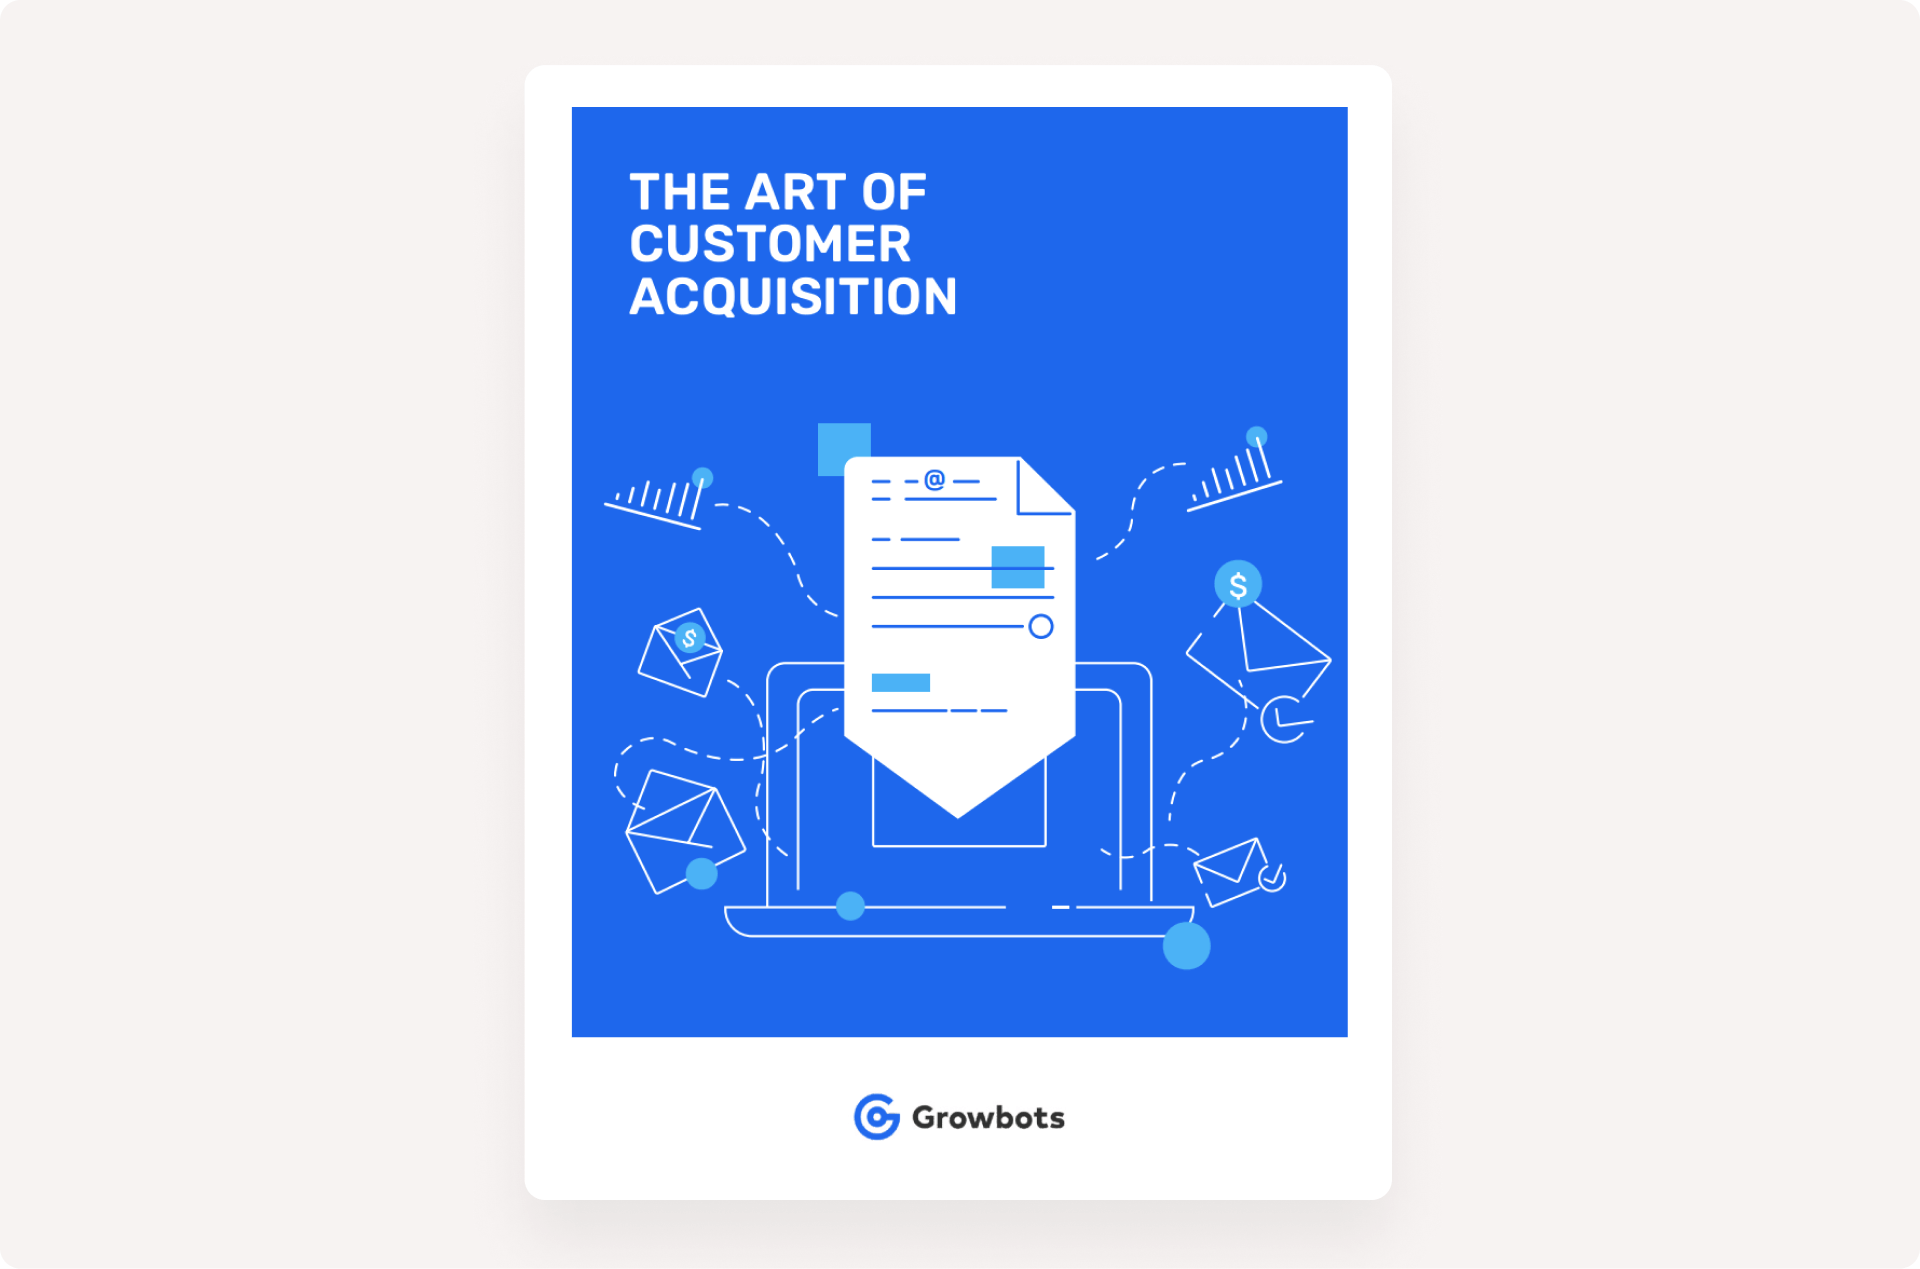 The art of Customer Acquisition